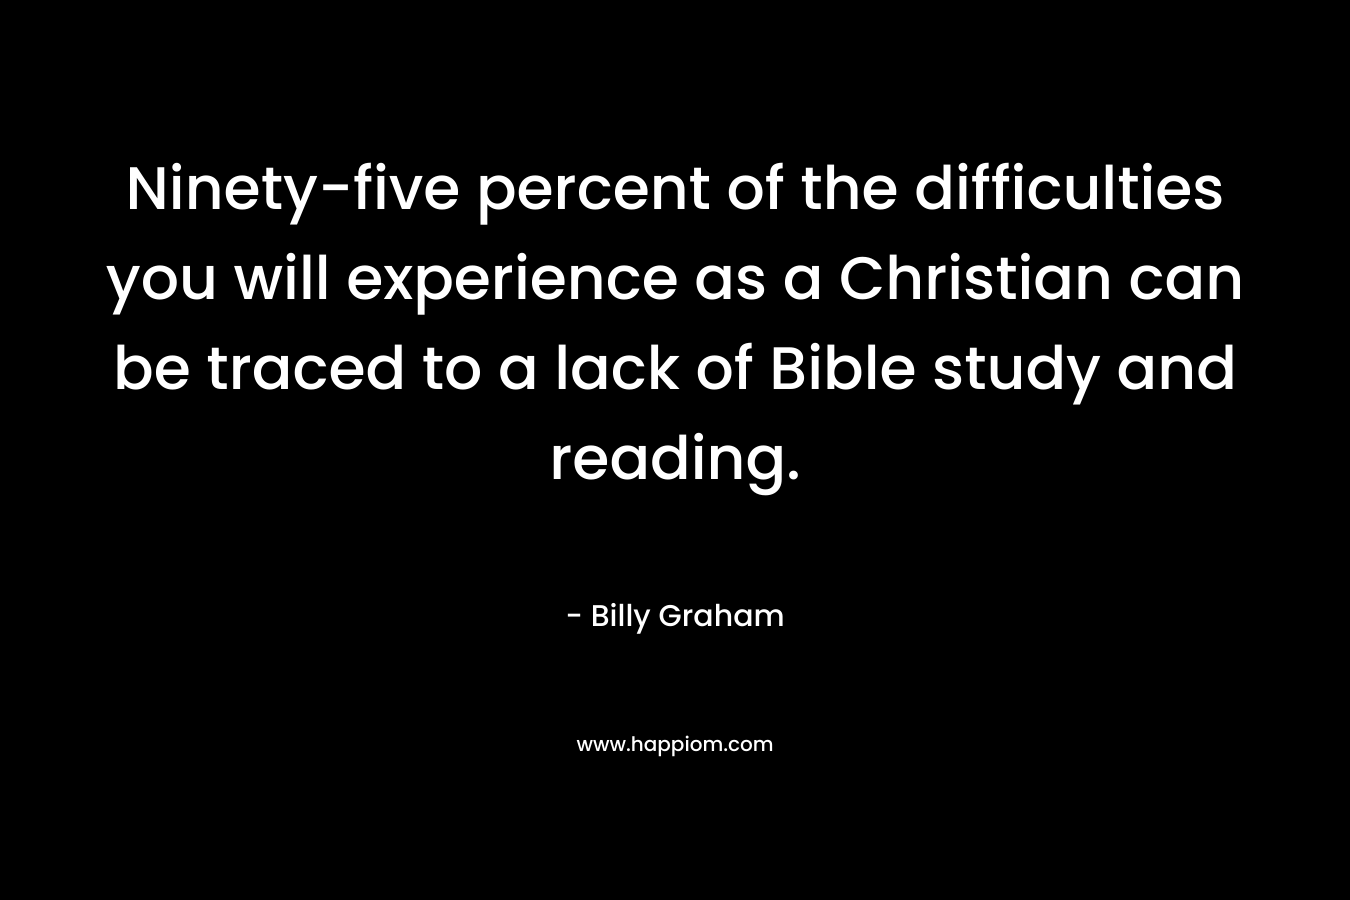 Ninety-five percent of the difficulties you will experience as a Christian can be traced to a lack of Bible study and reading.